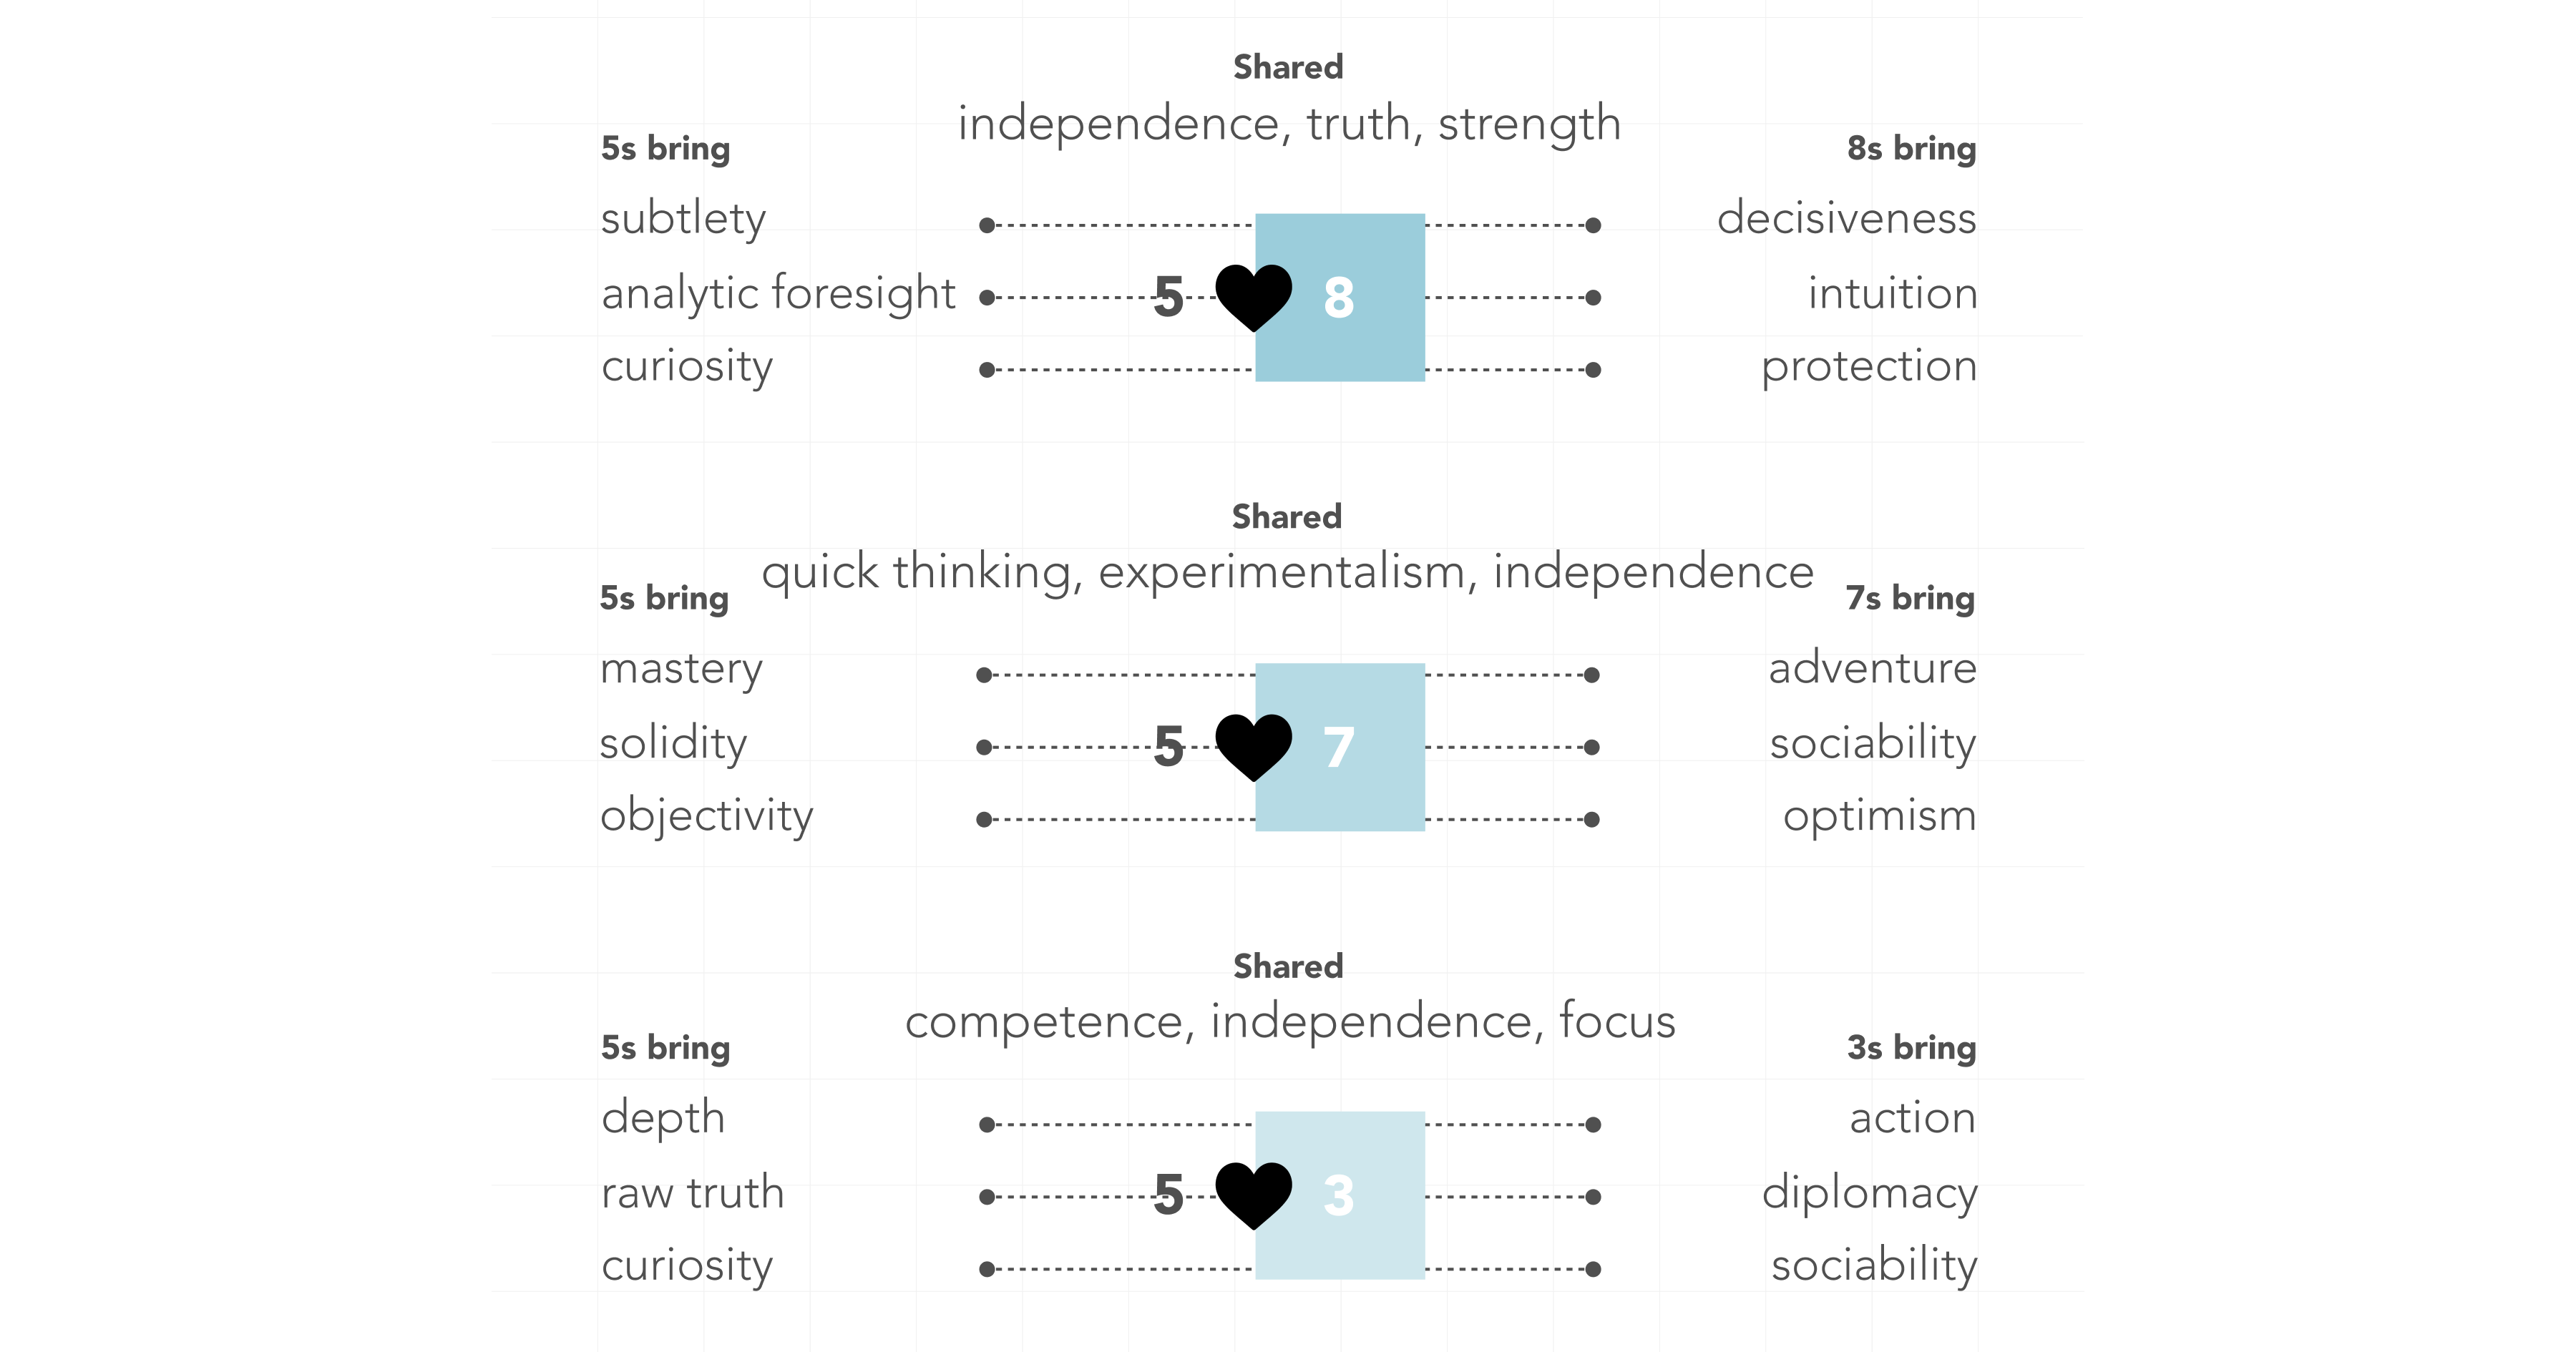 5s and 8s share independence, truth, strength. 5s bring subtlety, analytic foresight, curiosity. 8s bring decisiveness, intuition, protection. 5s and 7s share quick thinking, experimentalism, independence. 5s bring mastery, solidity, objectivity. 7s bring adventure, sociability, optimism. 5s and 3s share competence, independence, focus. 5s bring depth, raw truth, curiosity. 3s bring action, diplomacy, sociability.